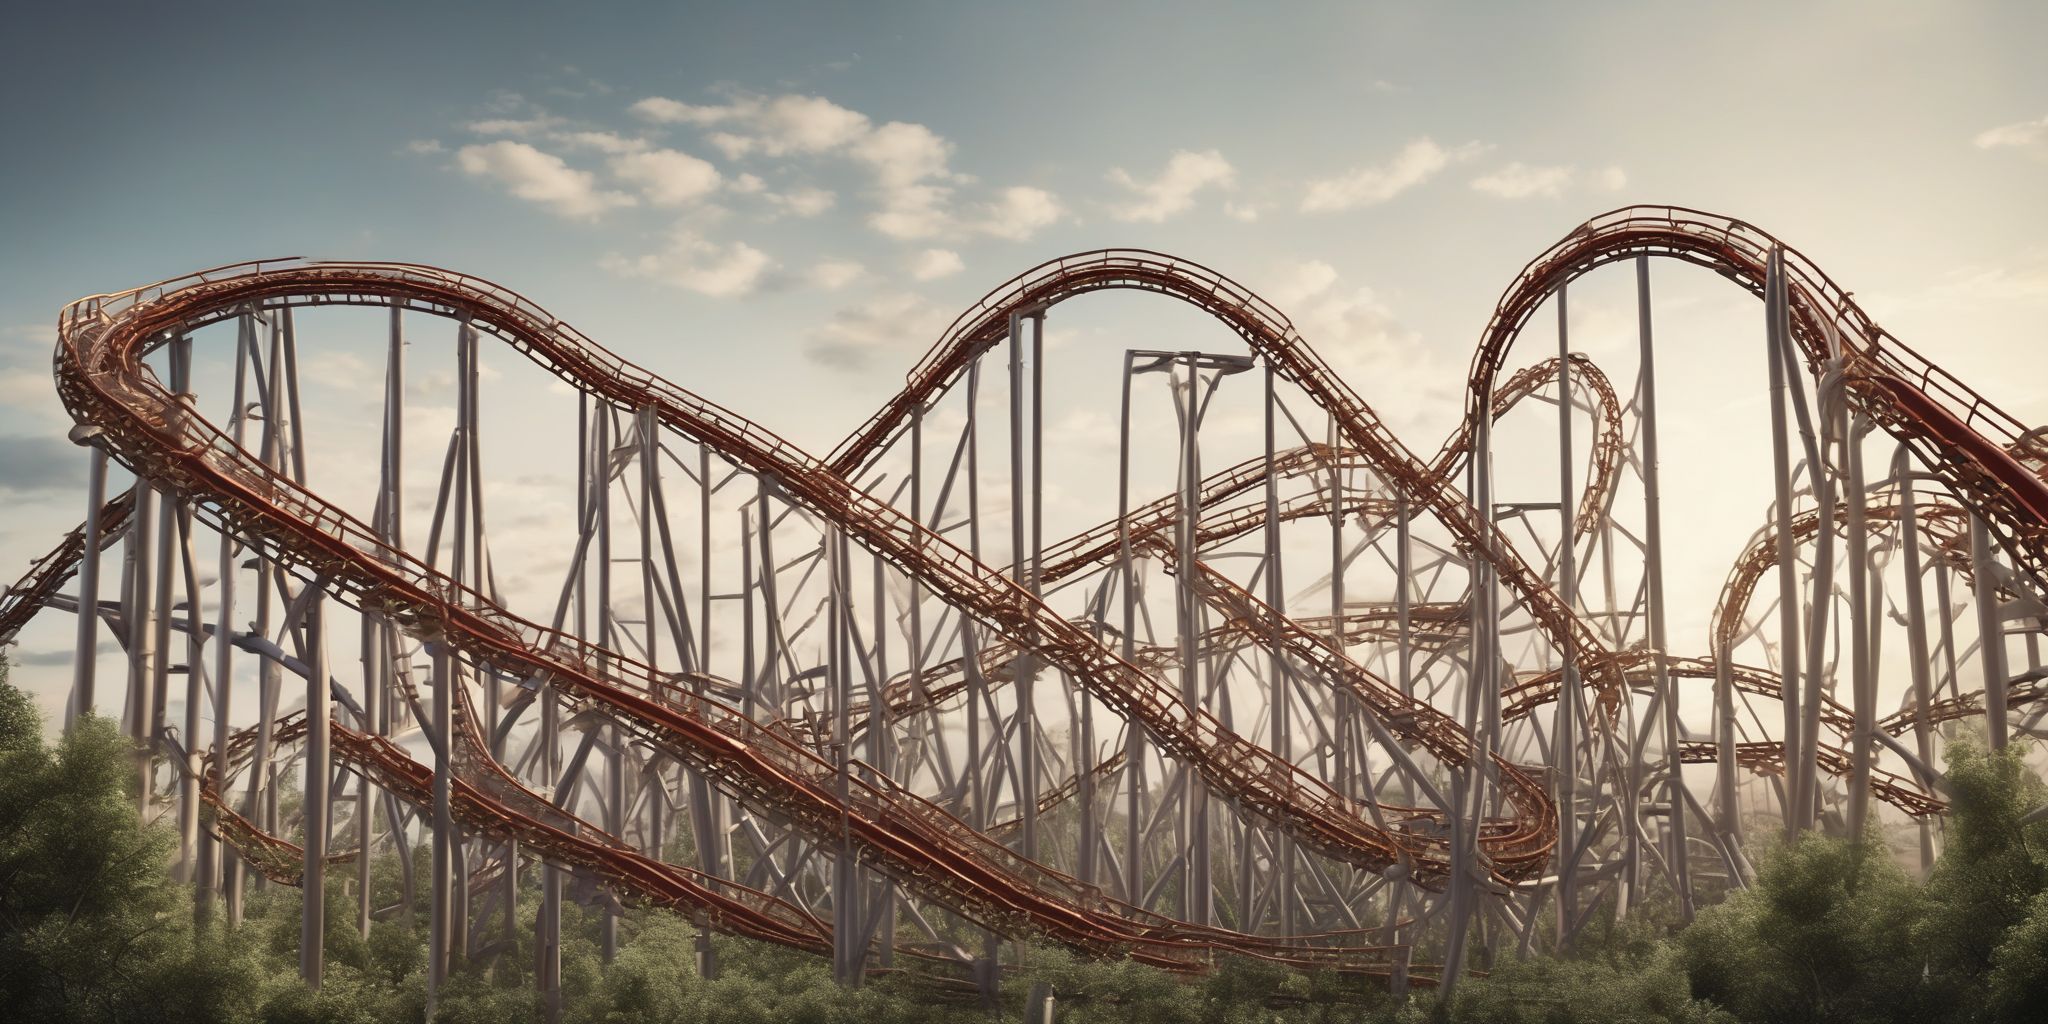 Roller coaster  in realistic, photographic style